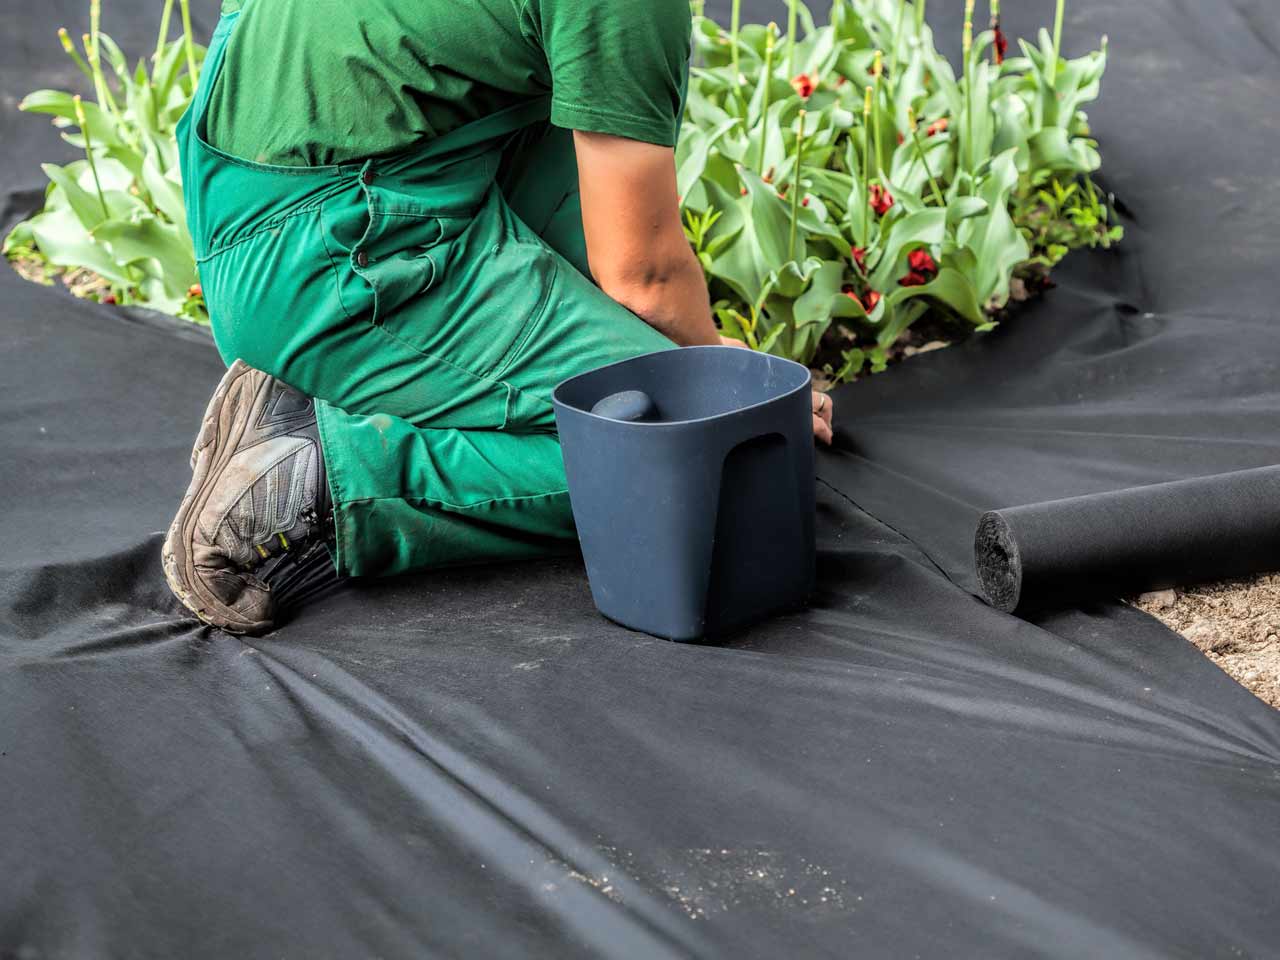 How To Use Black Plastic To Kill Weeds In Days - double-amplitude